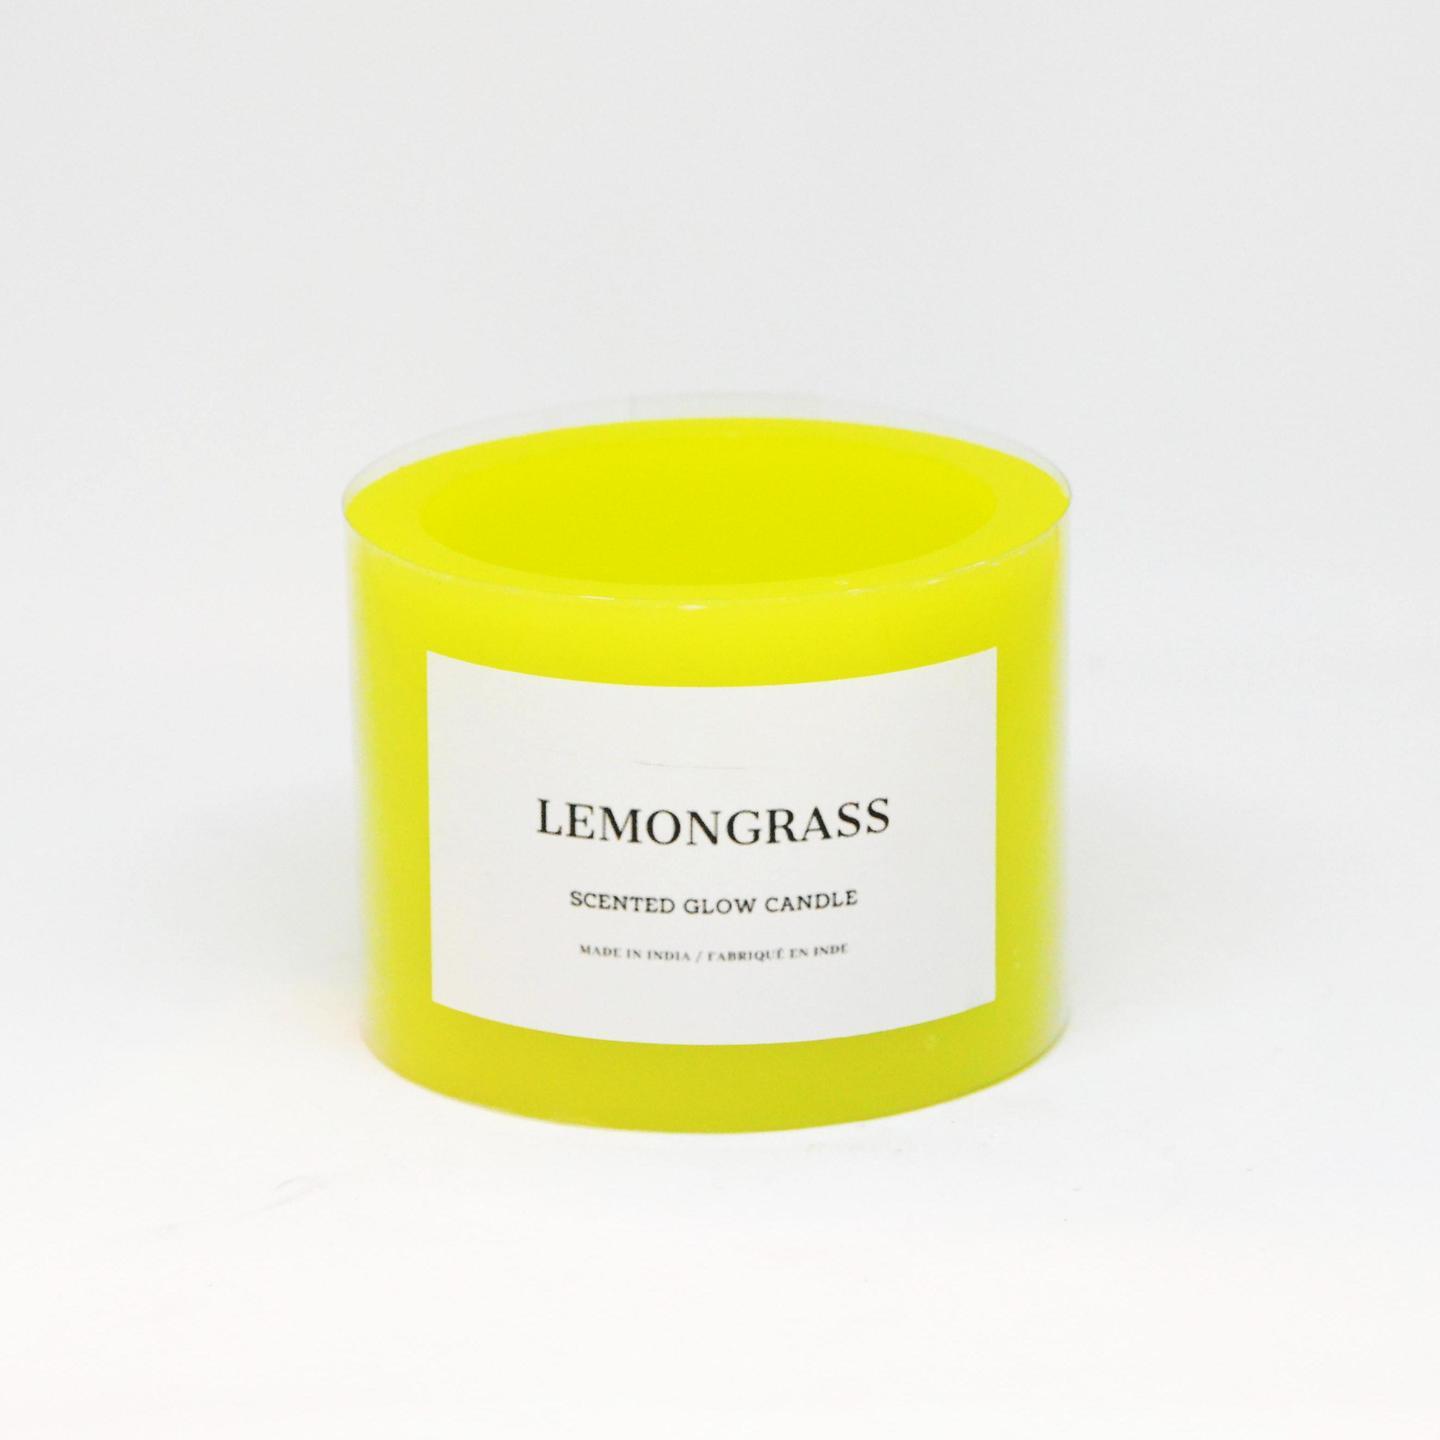 Scented Glow Candle - Lemon Grass